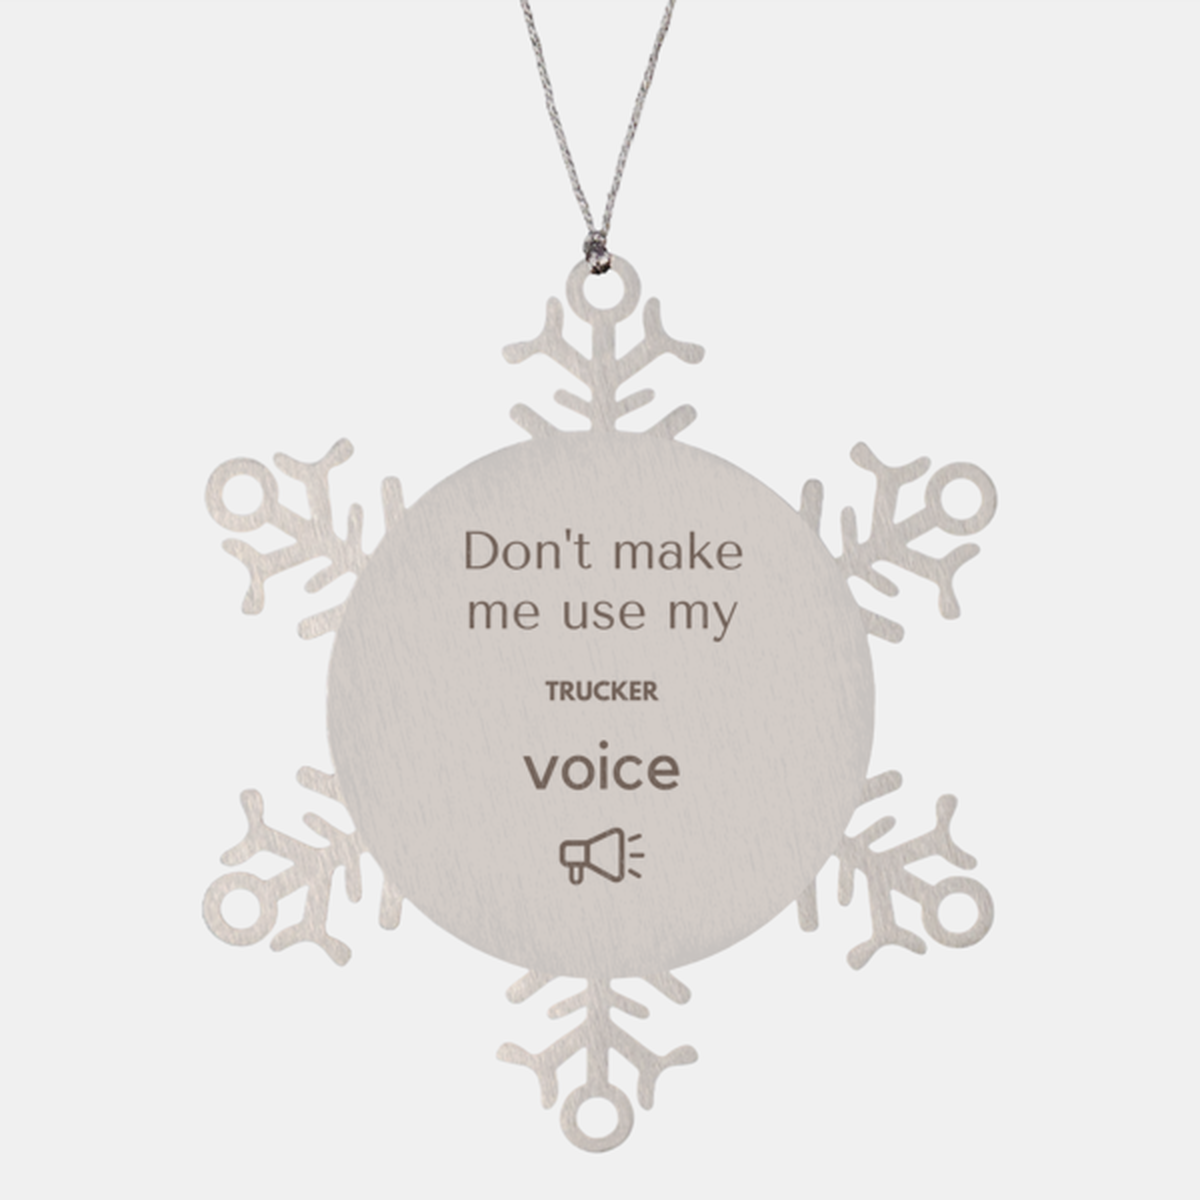 Don't make me use my Trucker voice, Sarcasm Trucker Ornament Gifts, Christmas Trucker Snowflake Ornament Unique Gifts For Trucker Coworkers, Men, Women, Colleague, Friends